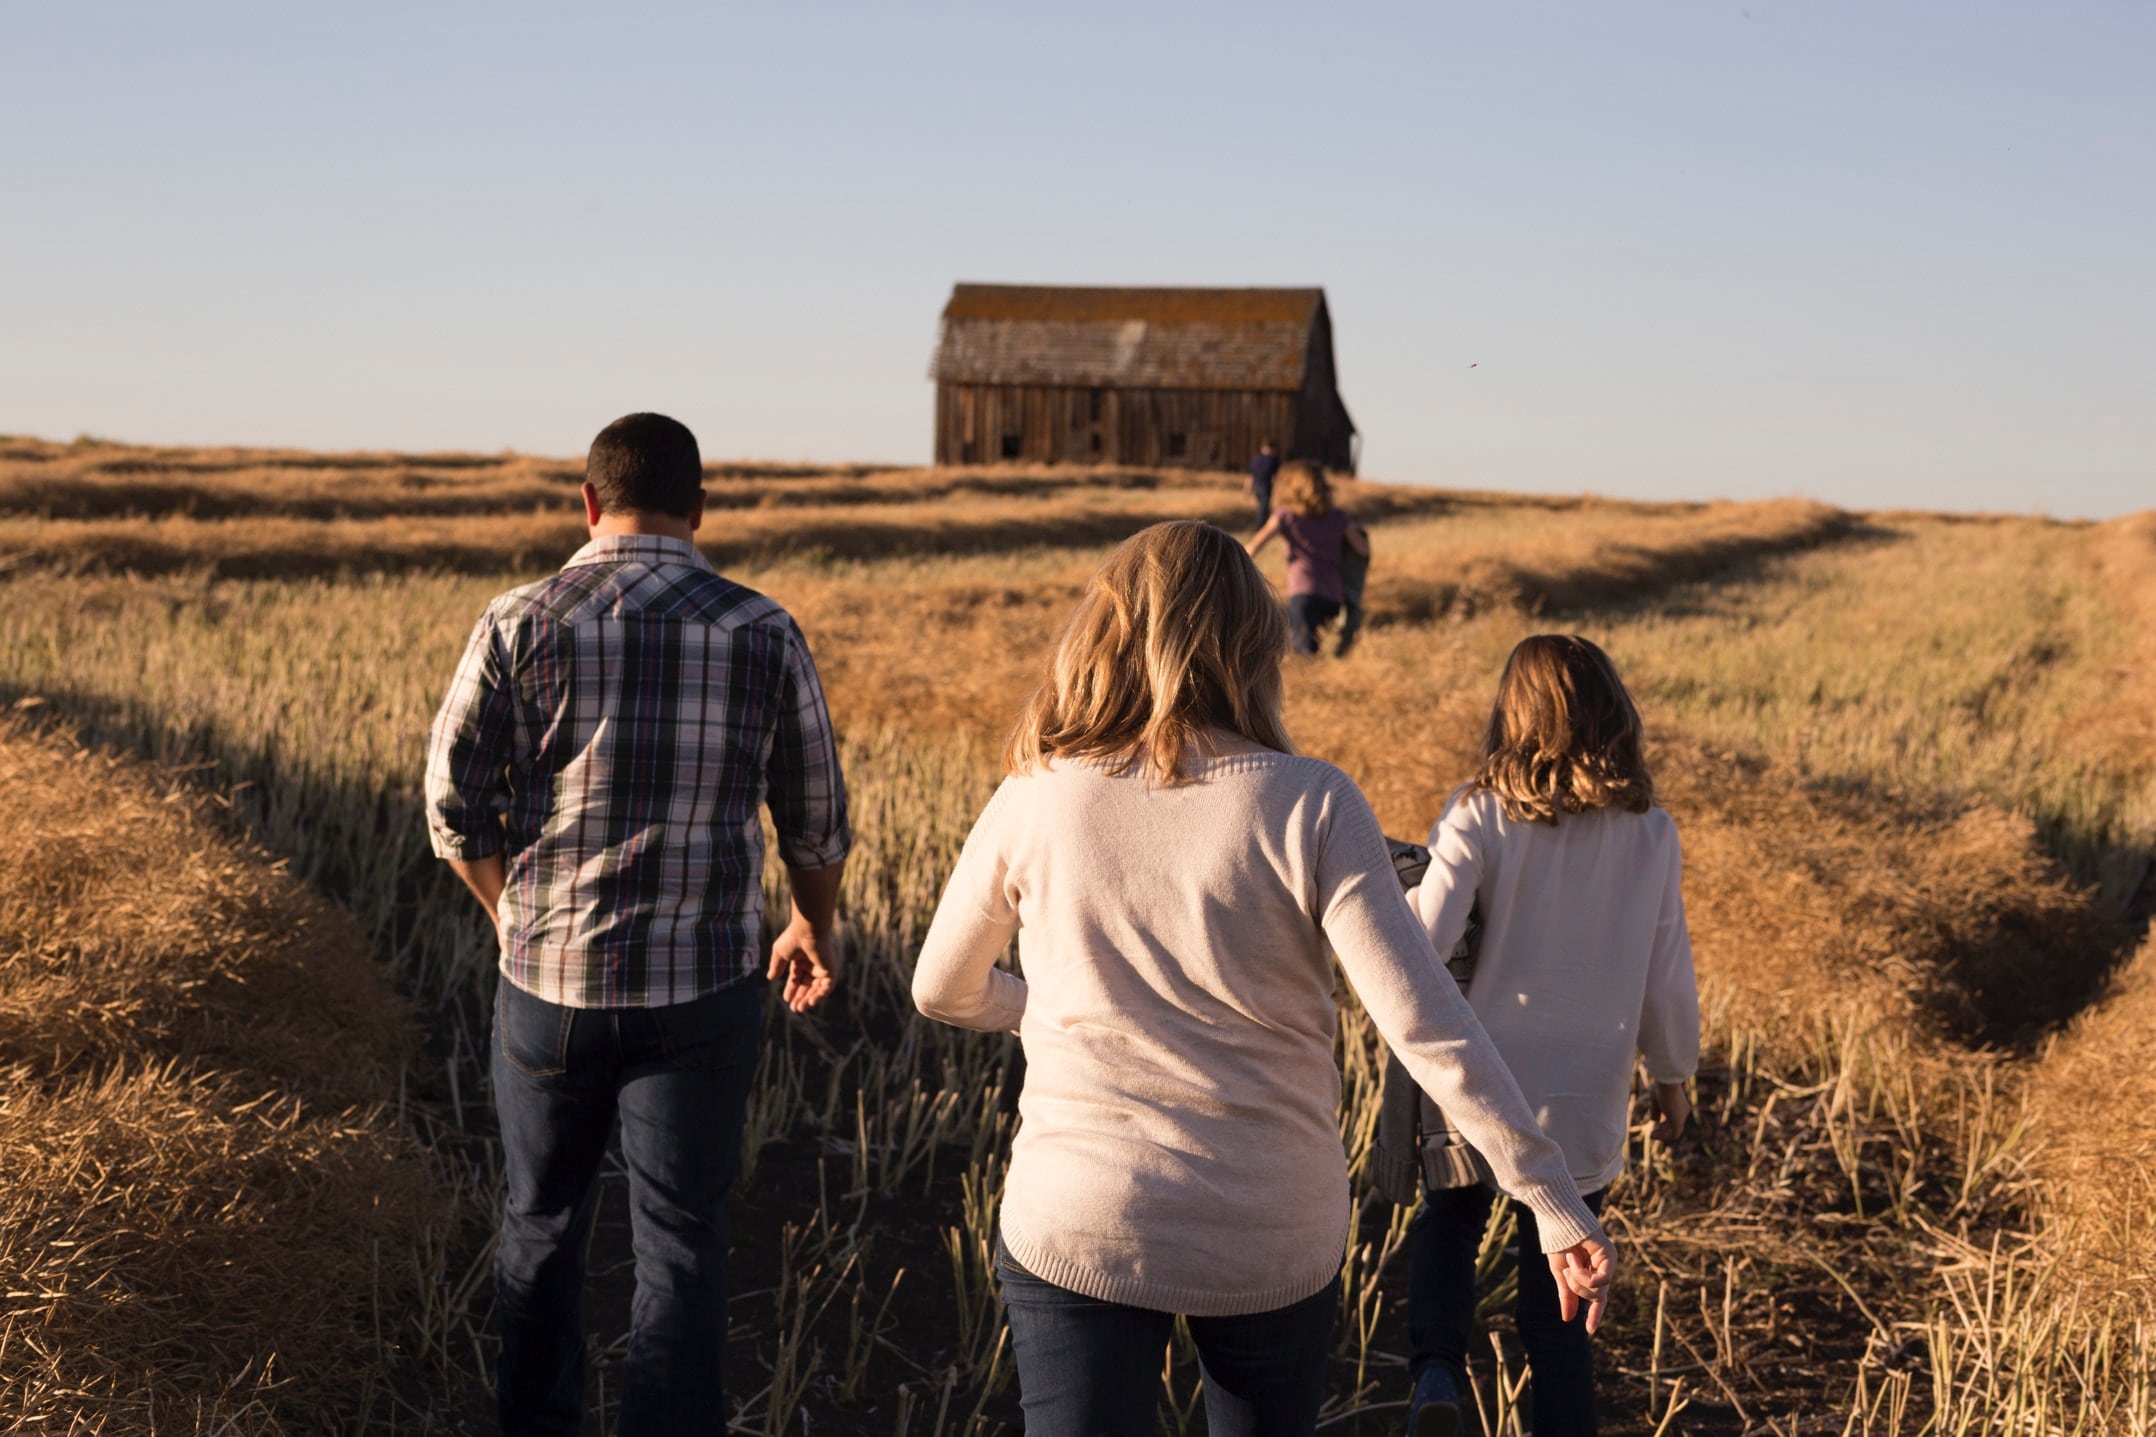 A family with a mum, dad and three children, walking towards a barn in an open field